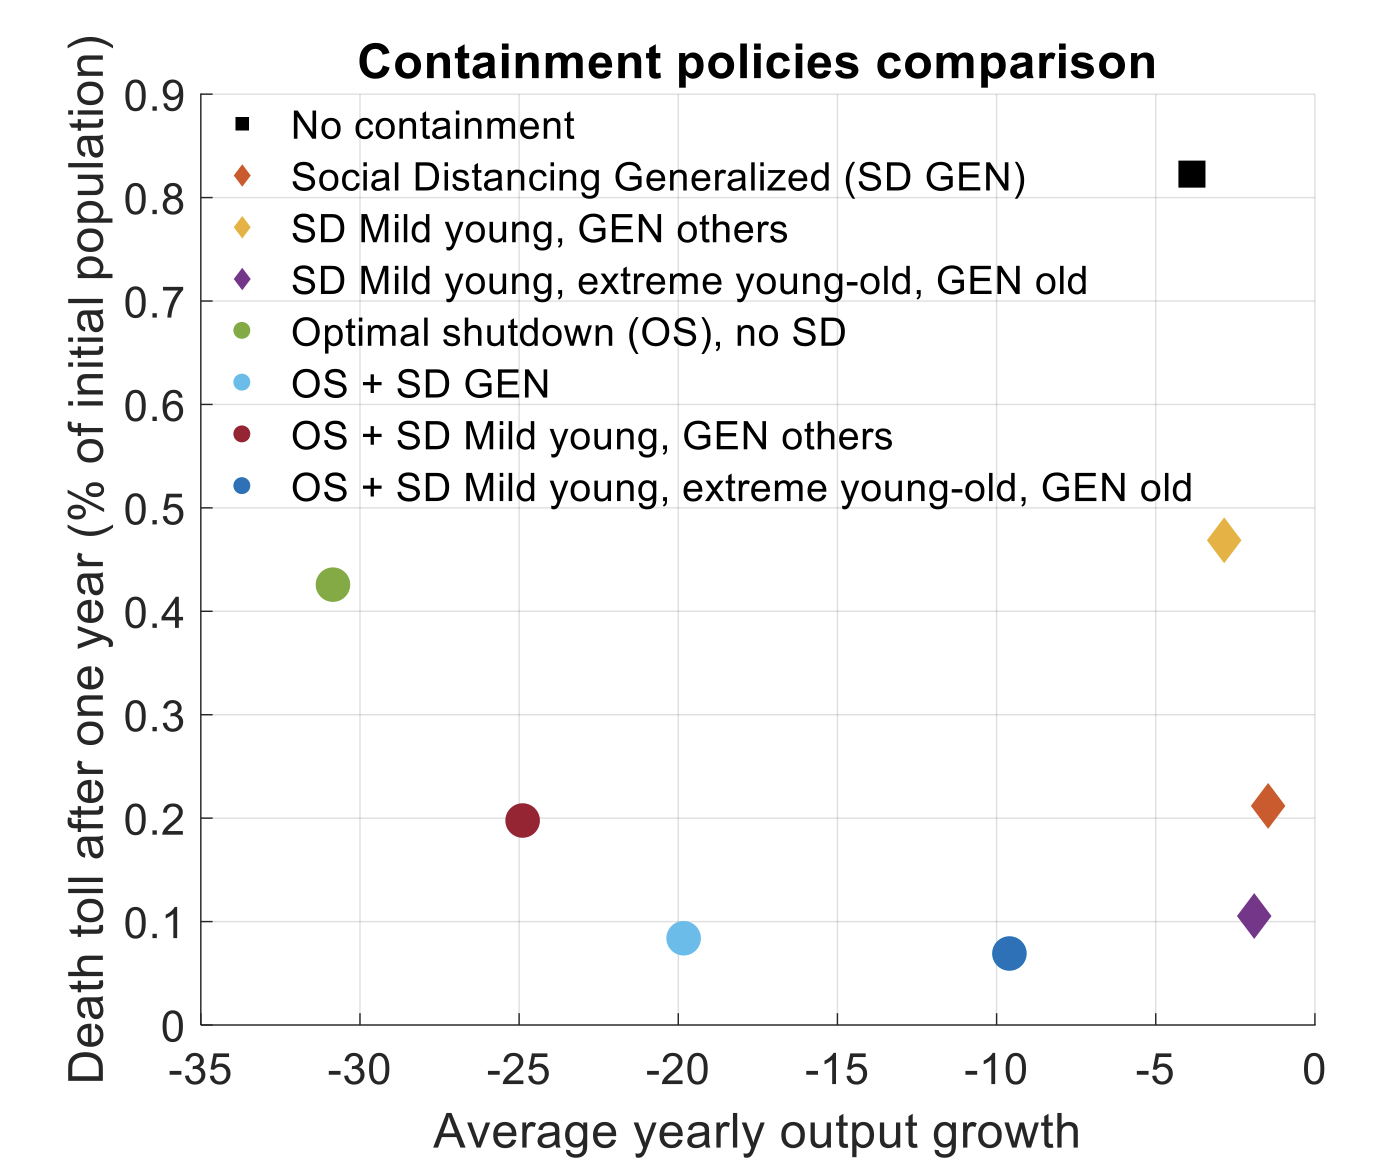 The macroeconomics of age-specific containment measures for COVID-19 2